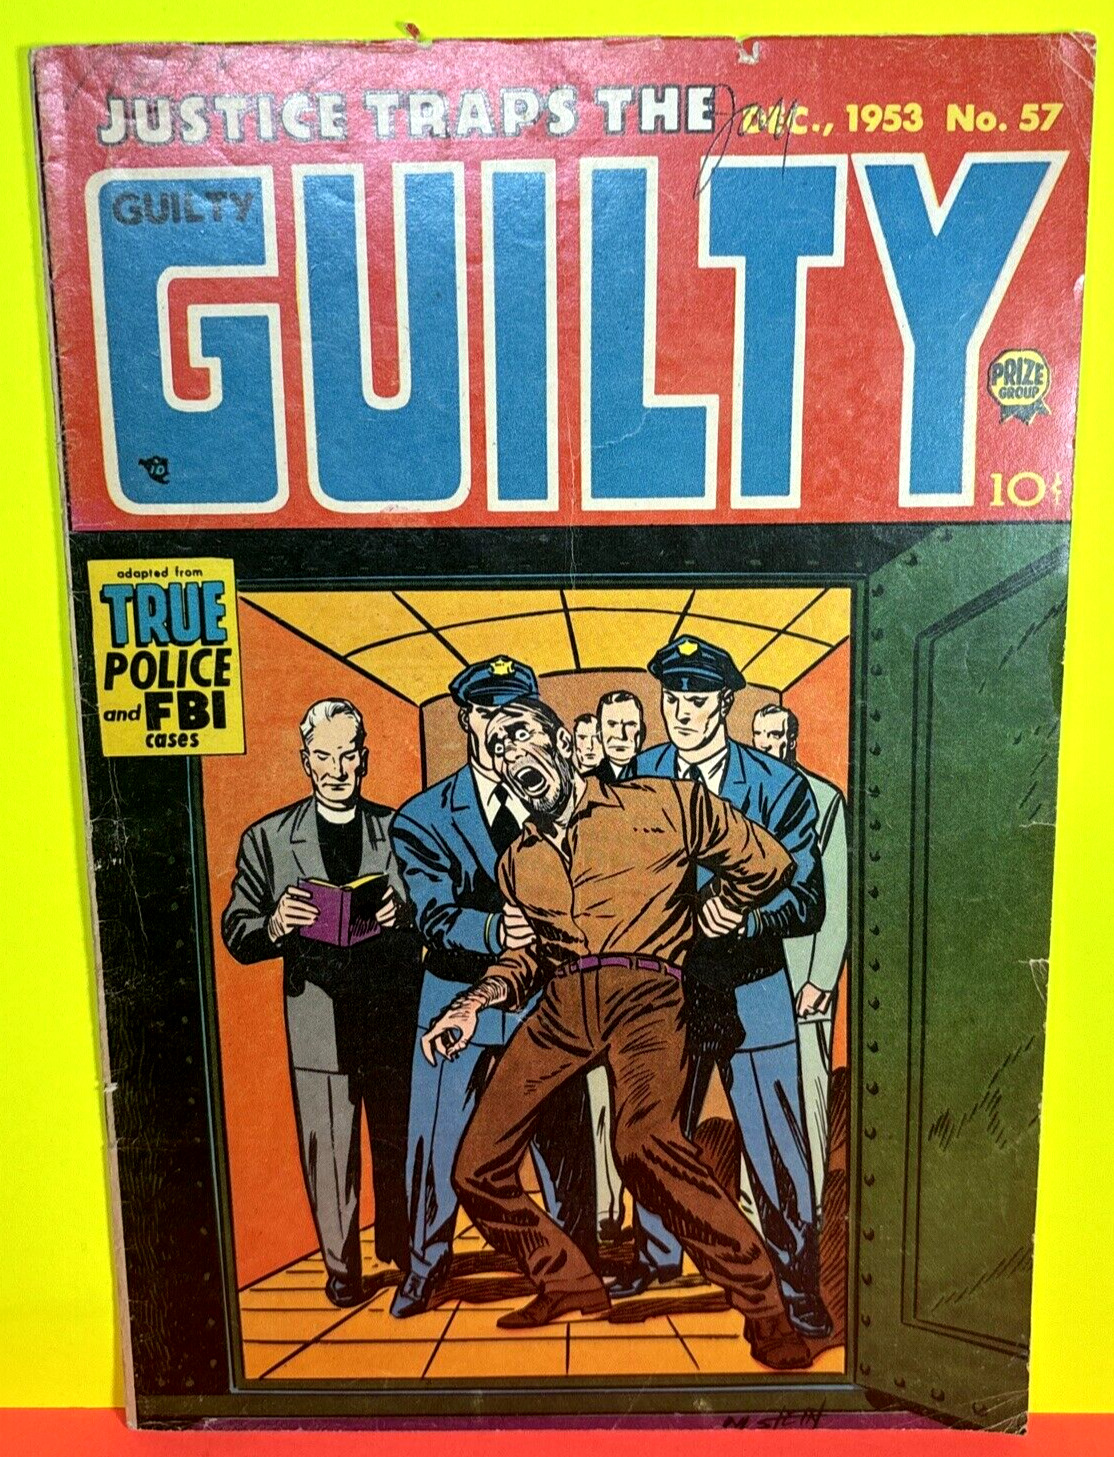 1953 Justice Traps the “GUILTY” Prize Group Comic Book No. 57 True Police Storys